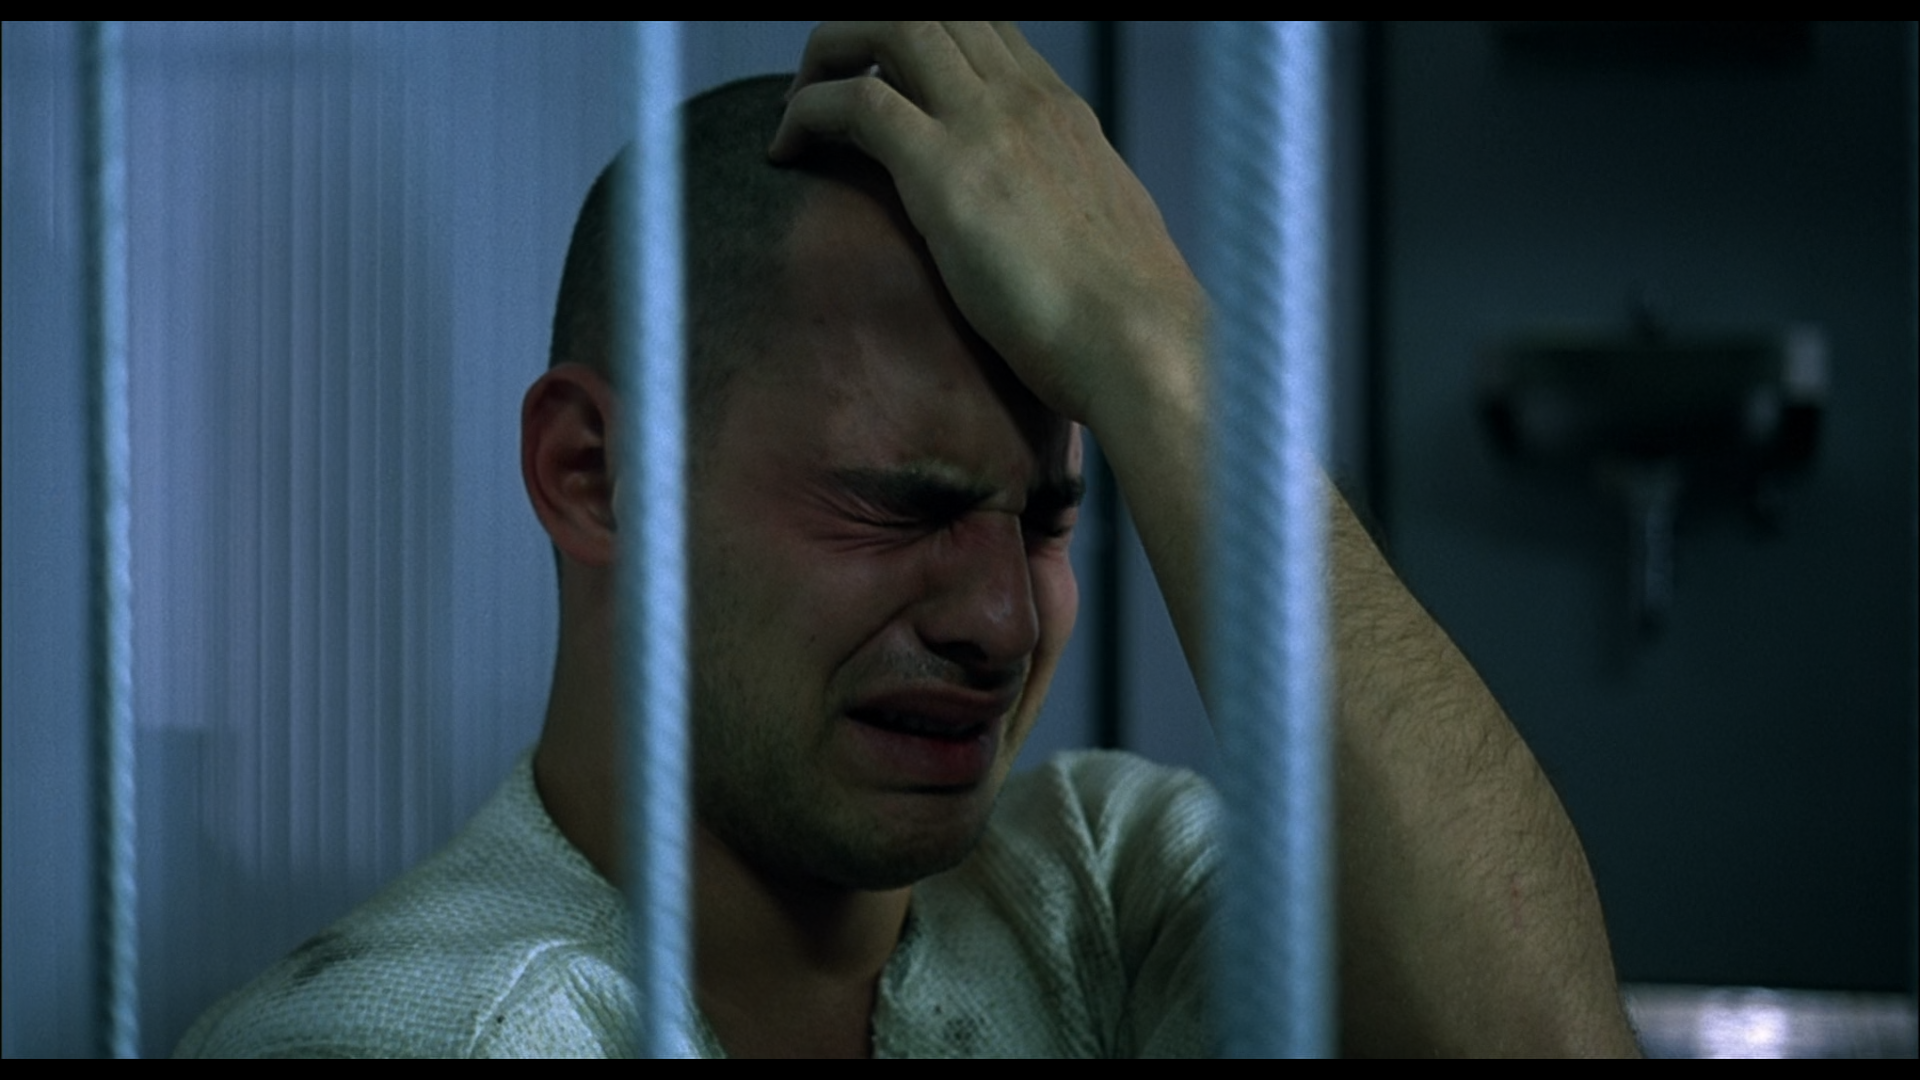 Mentally exhausted inmates (from the movie The Experiment)